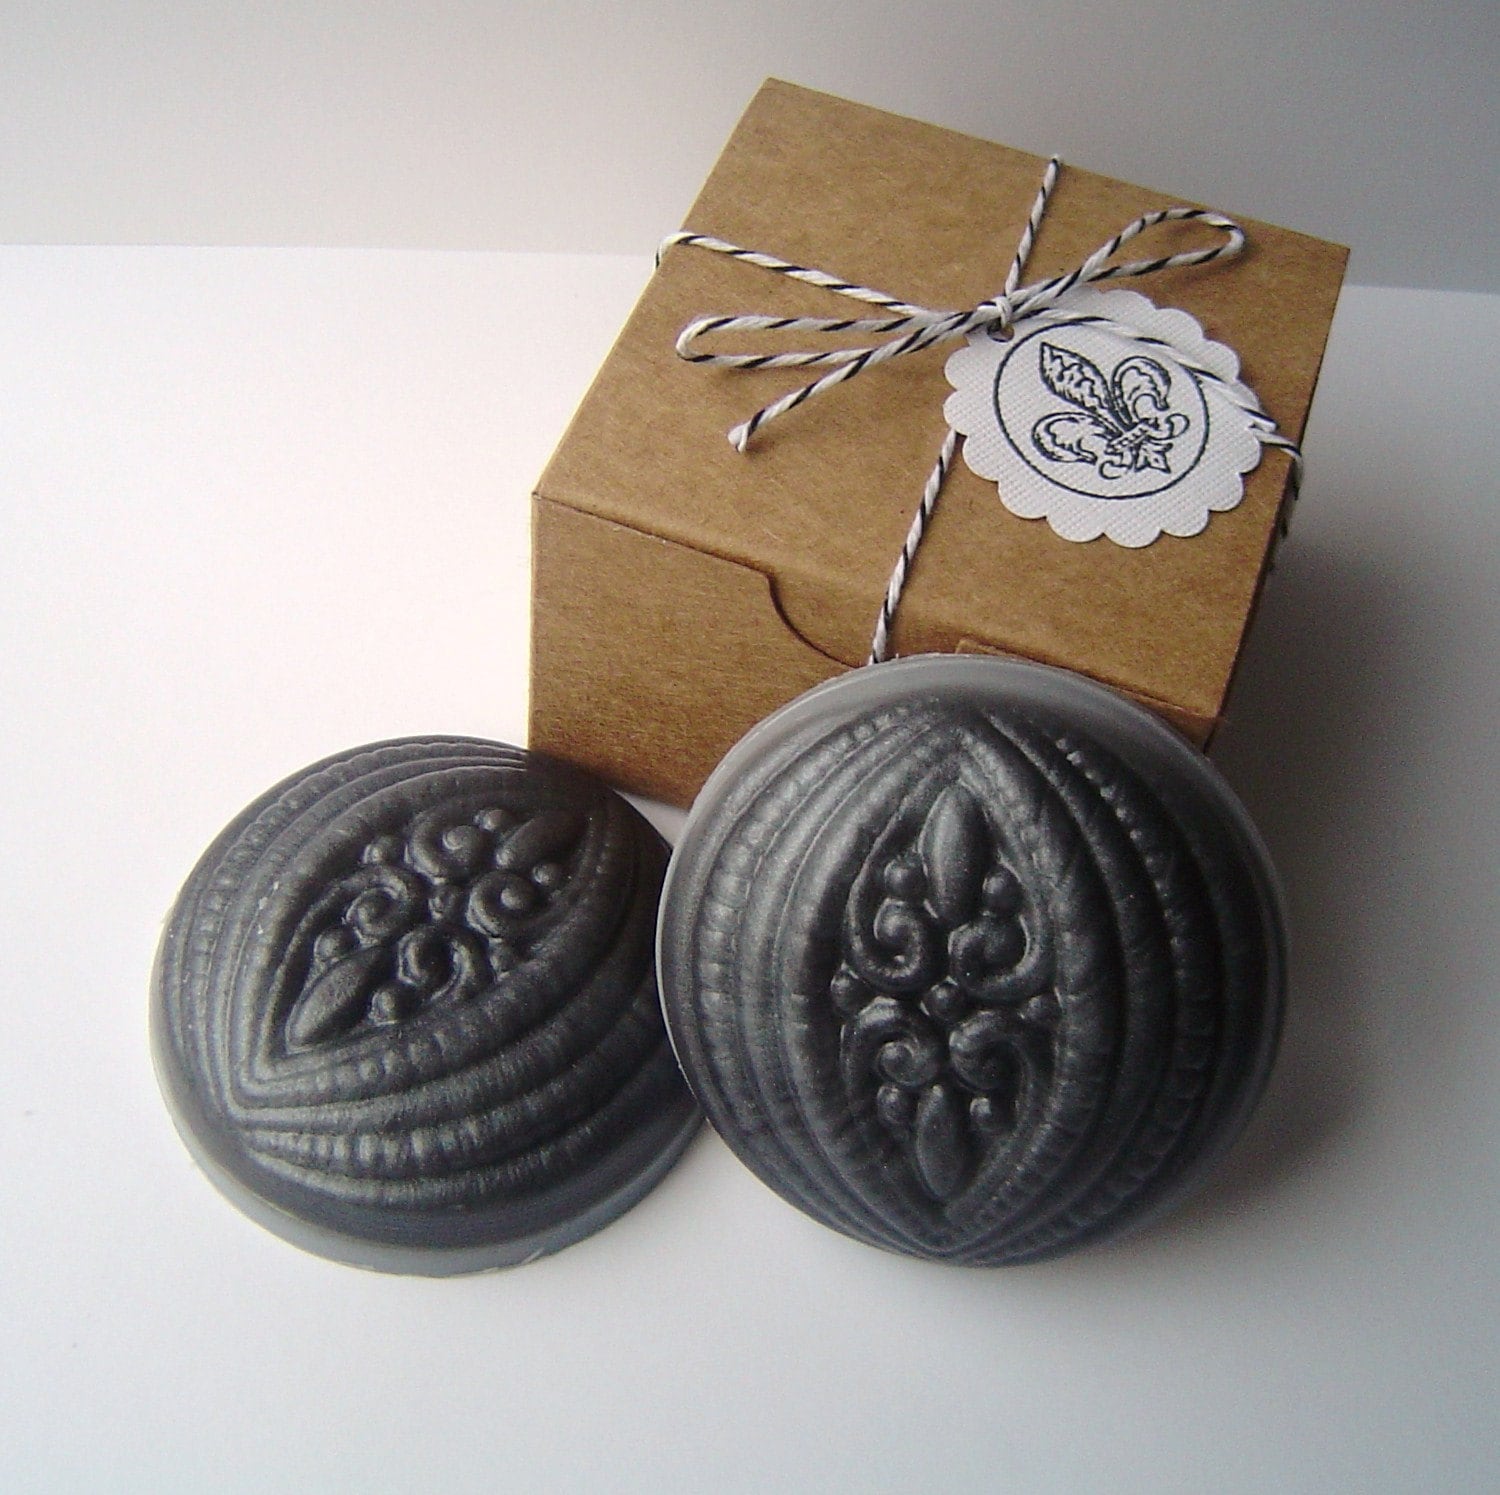 New-White Ginger and Amber Button Fleur De Lis Guest Soap Set-Glycerin and Goat's Milk Soap